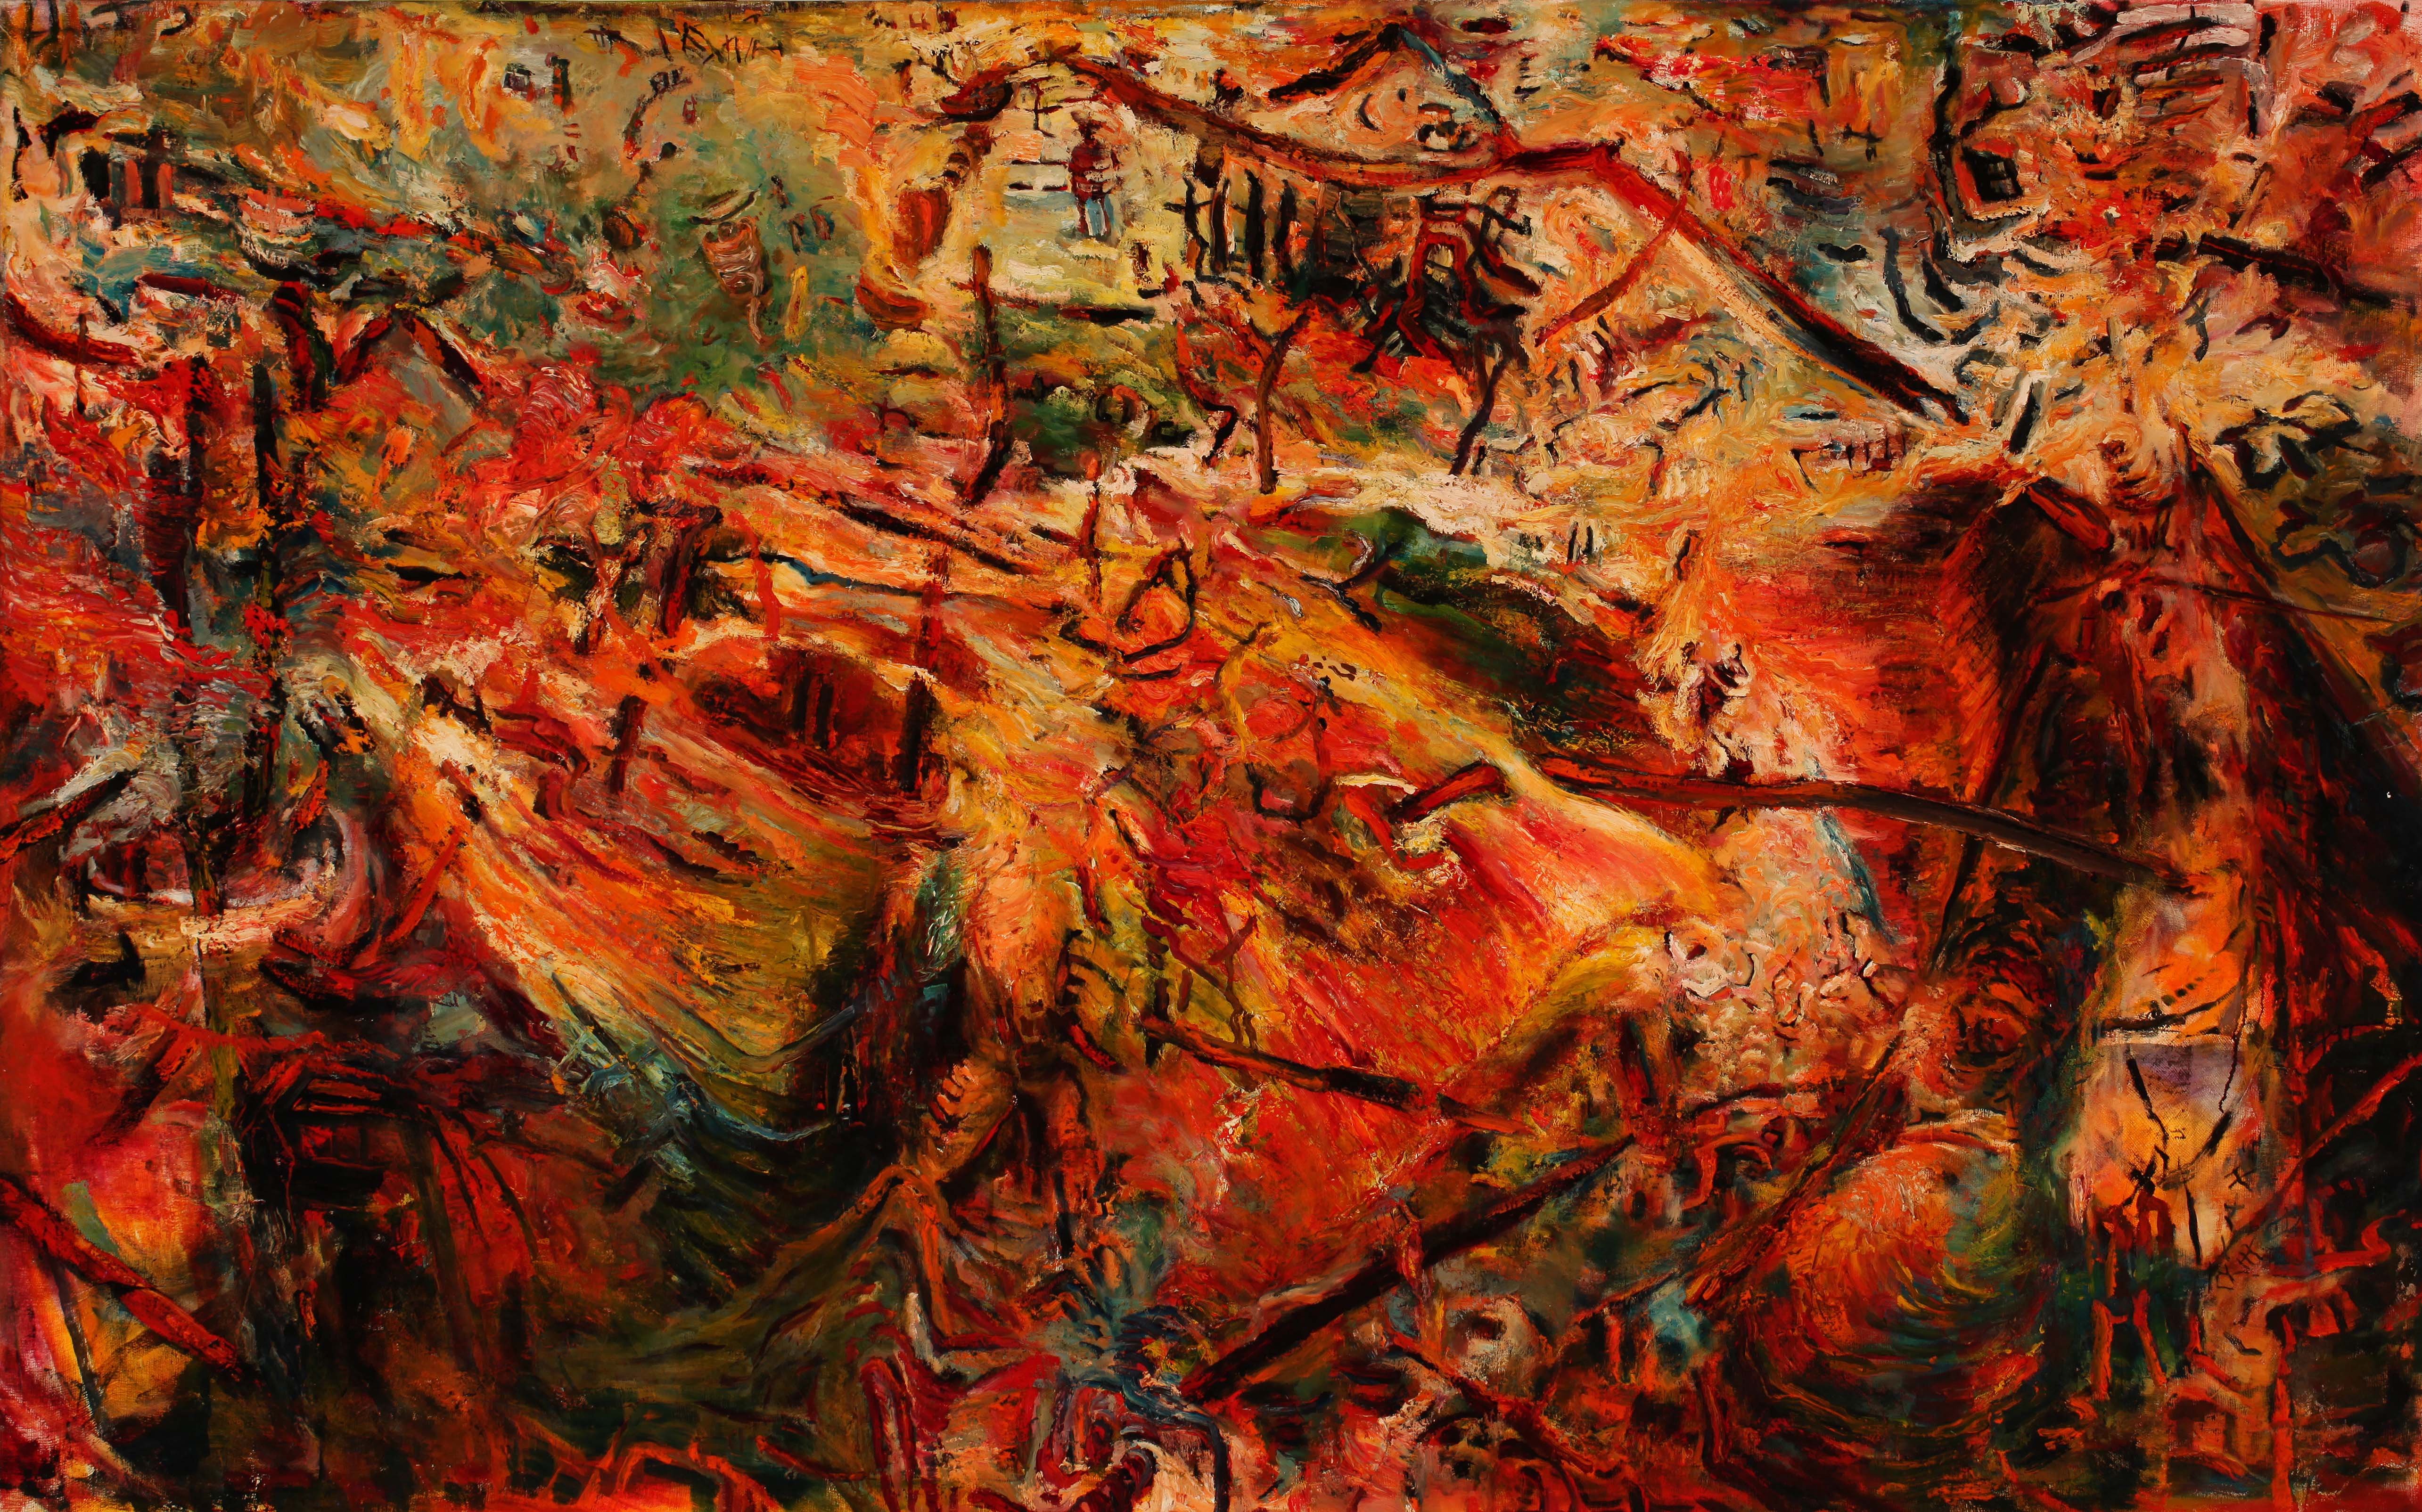 The Crazy City Series III, 68 x 84 inches, Oil on Canvas, 1991